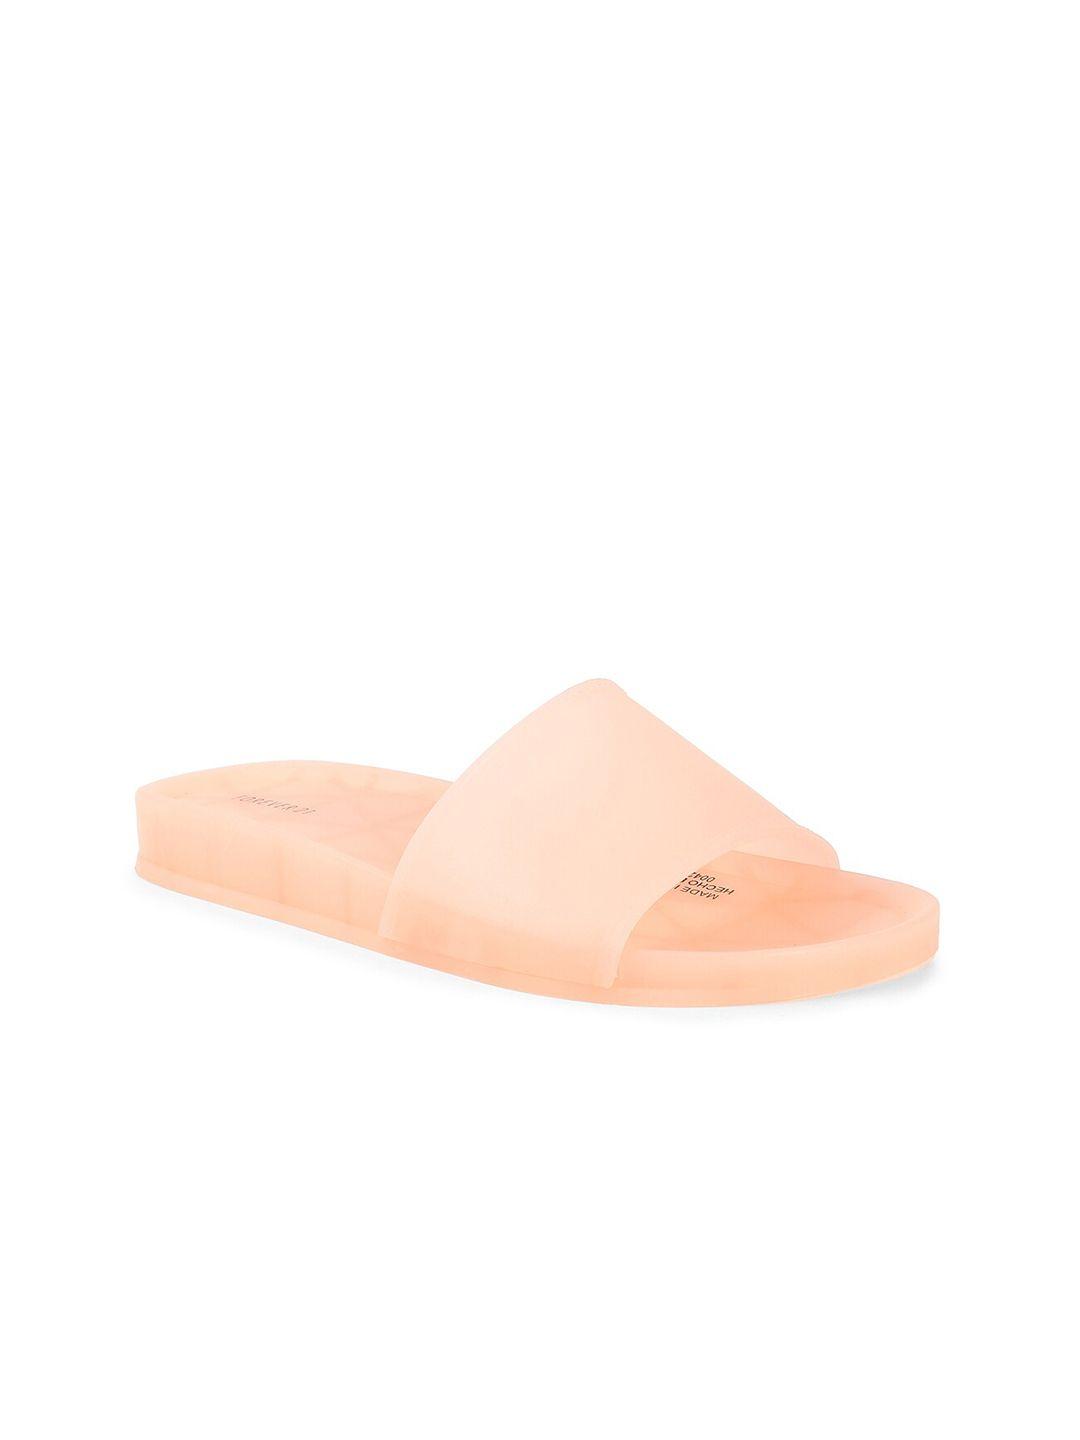 forever-21-women-nude-solid-casual-sliders